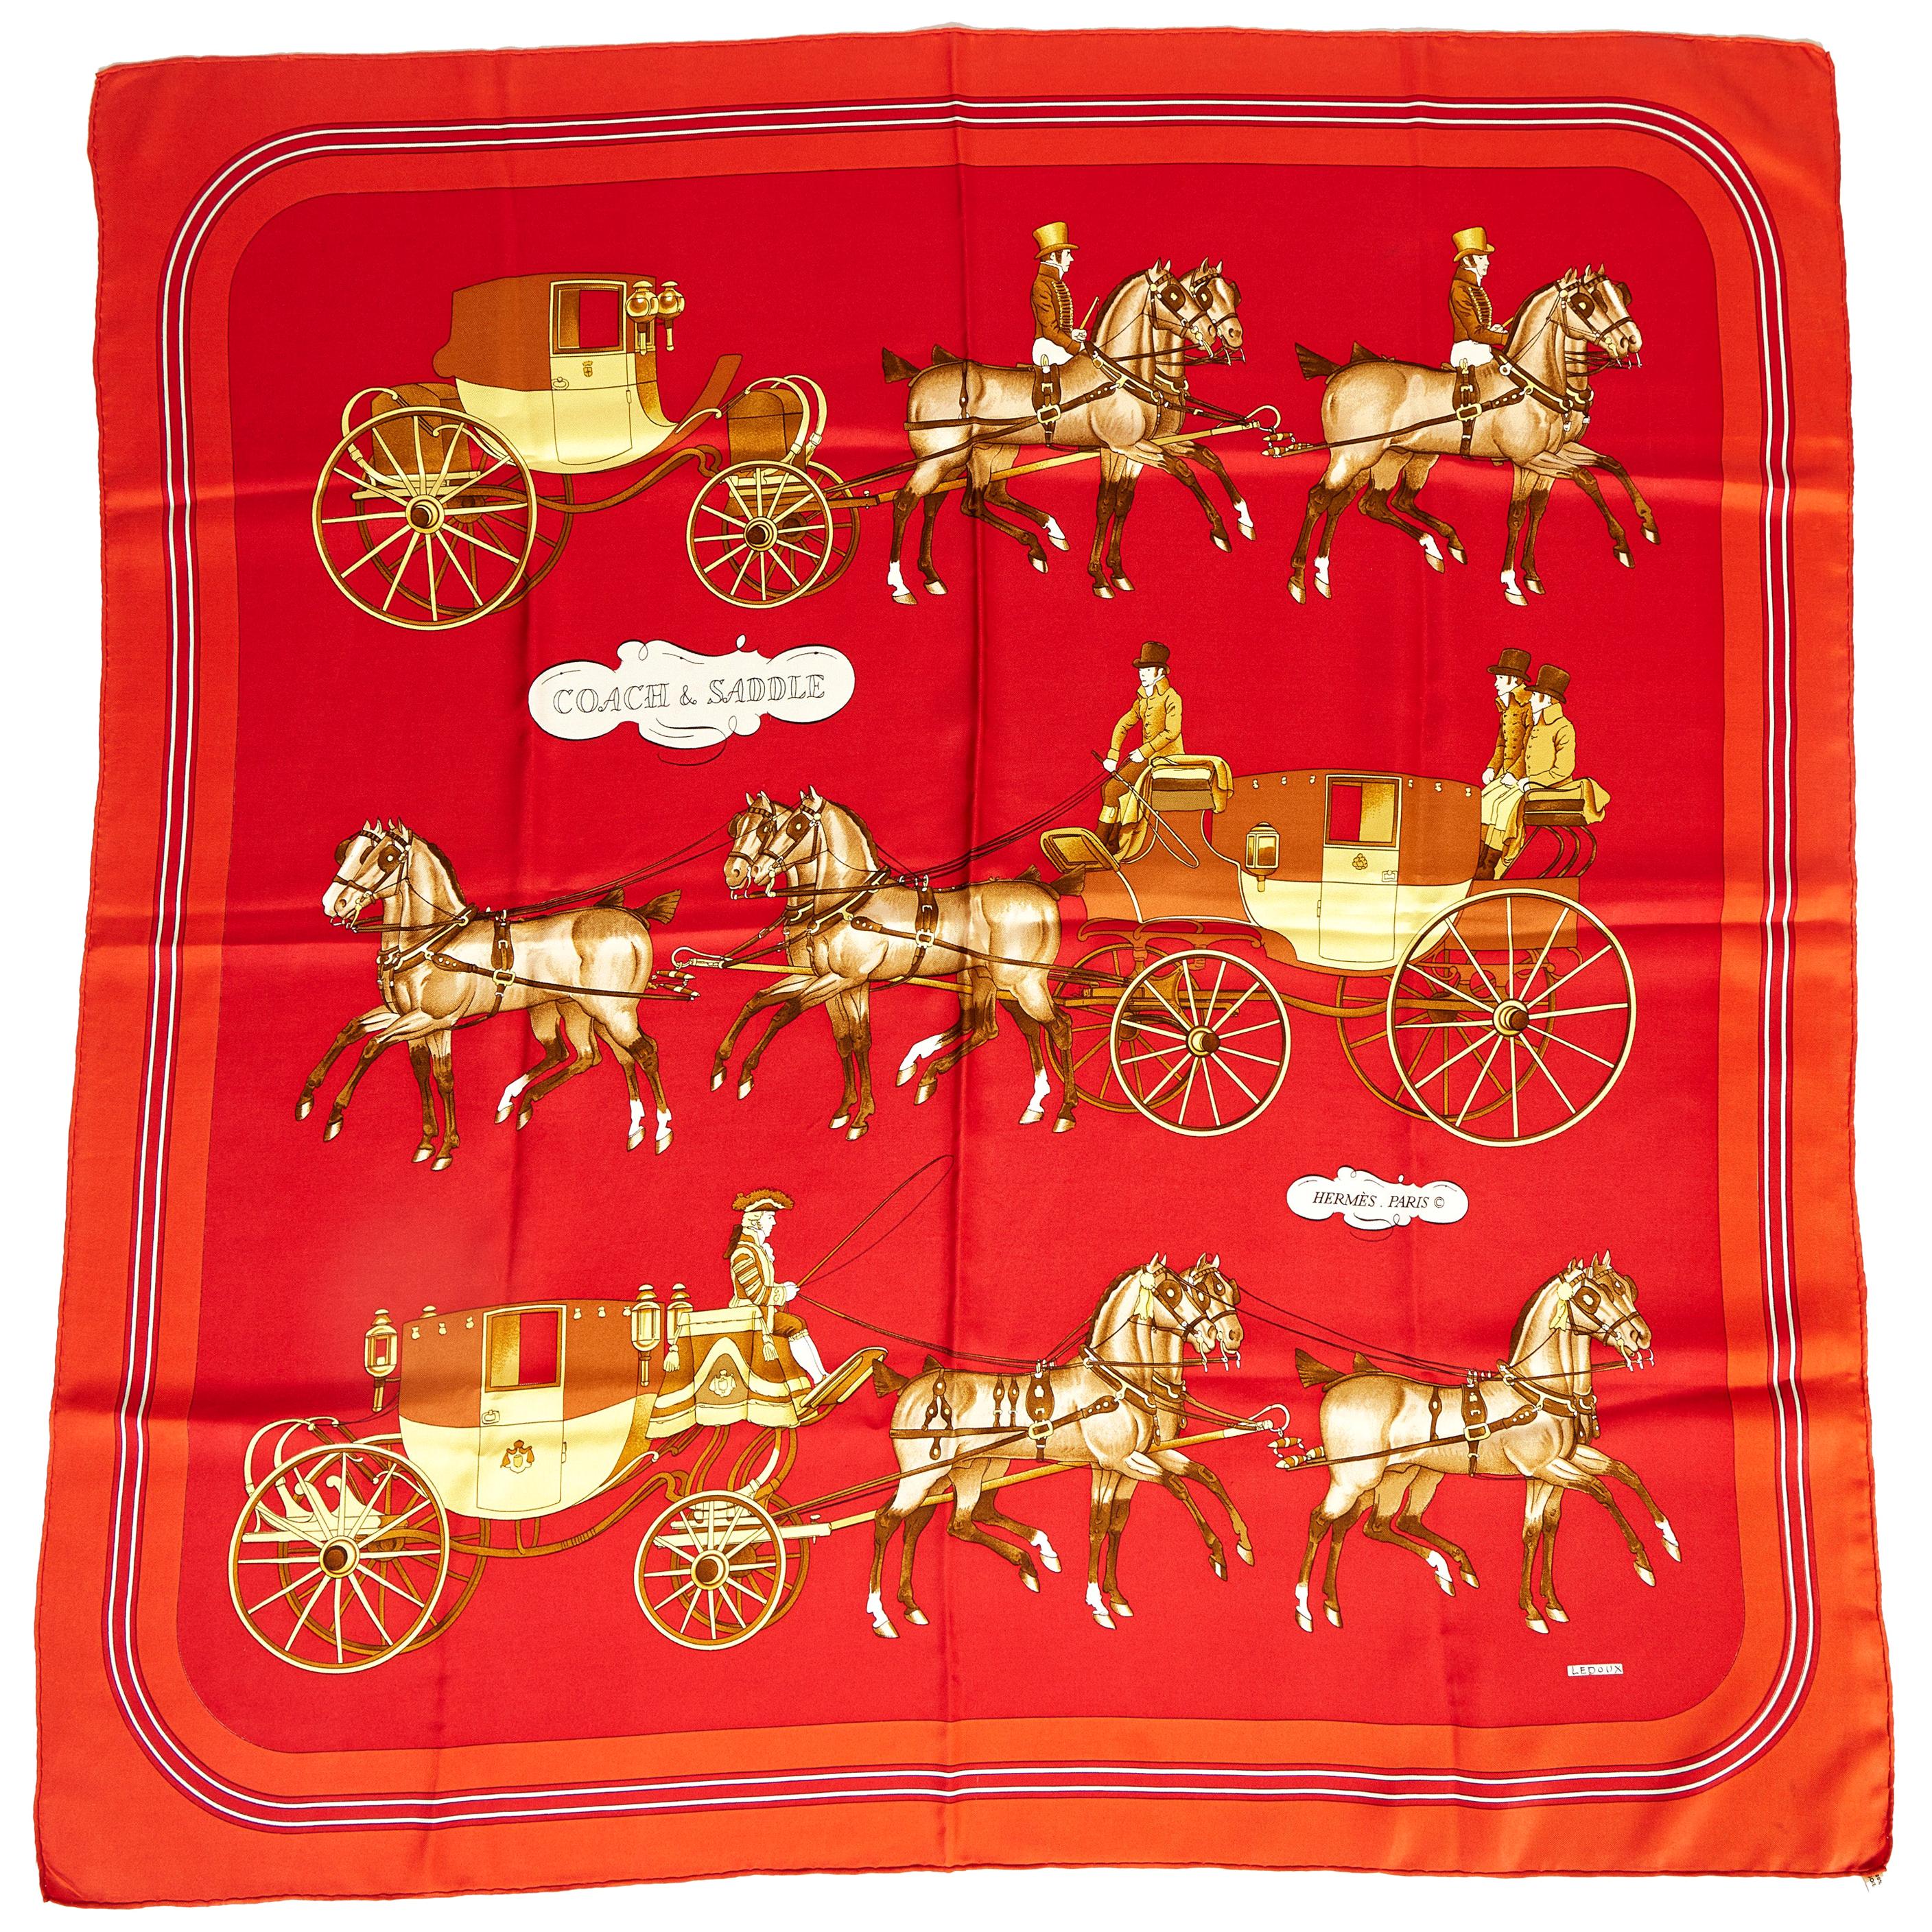 1990's Hermes Coach & Saddle Red Silk Scarf